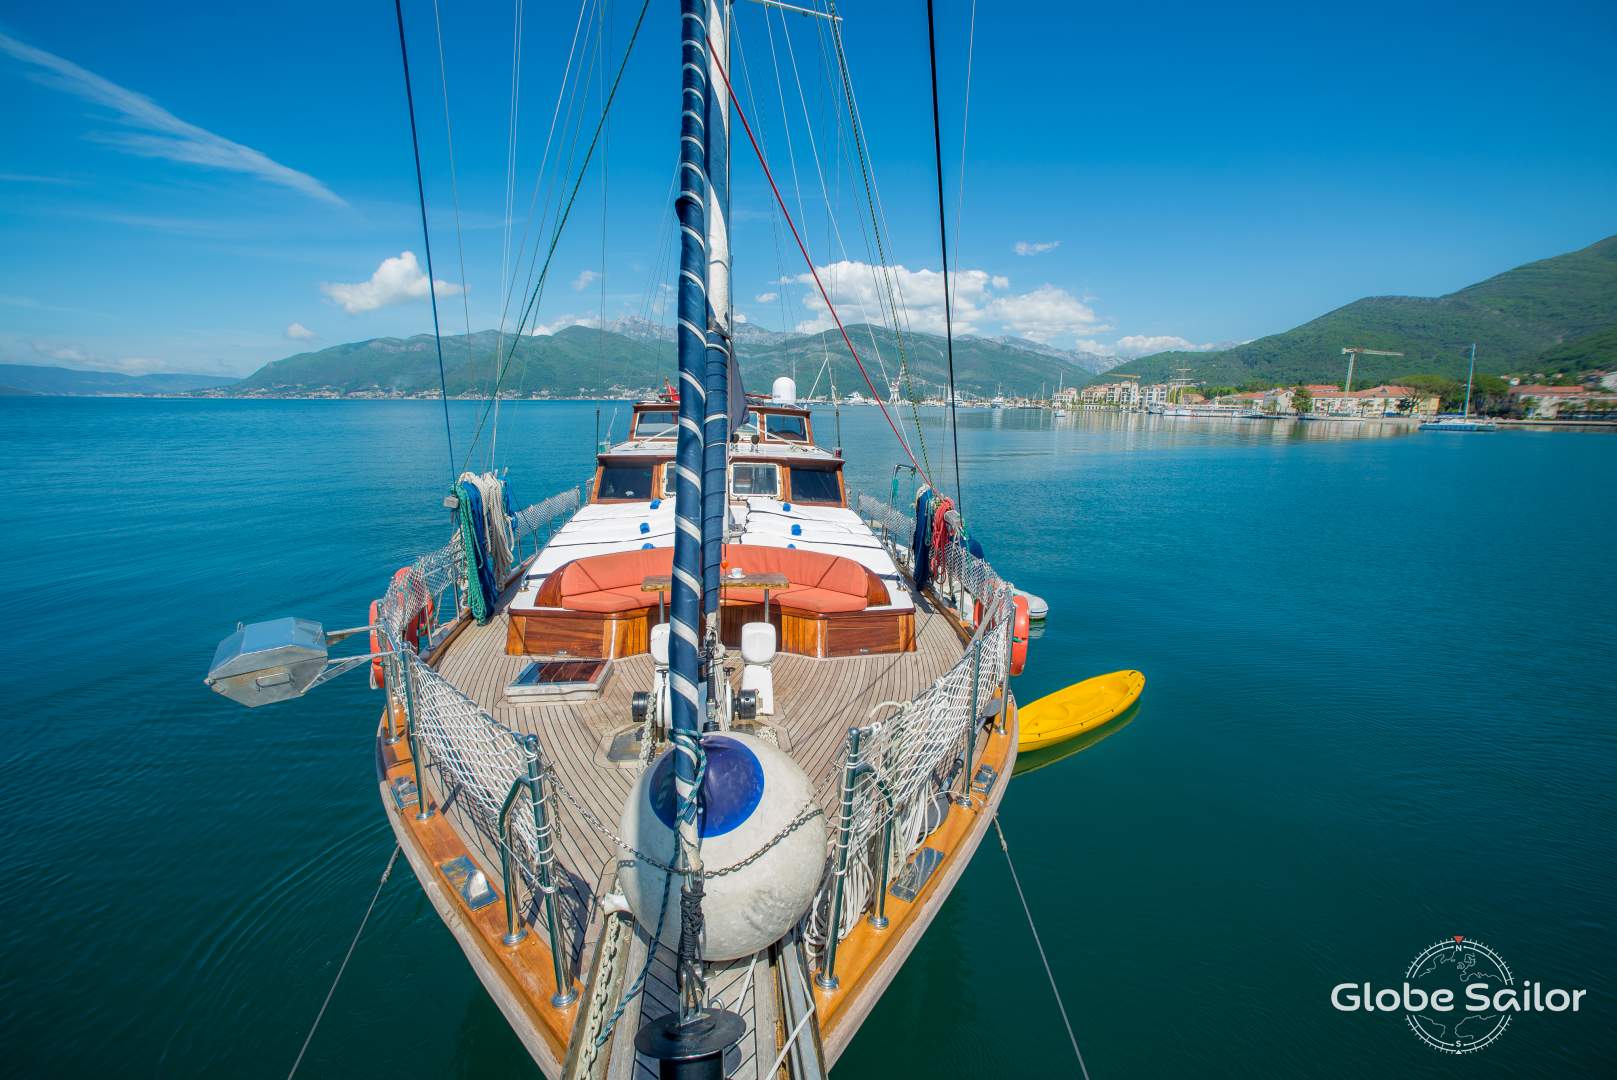 Explore the Adriatic Sea on board a traditional gulet